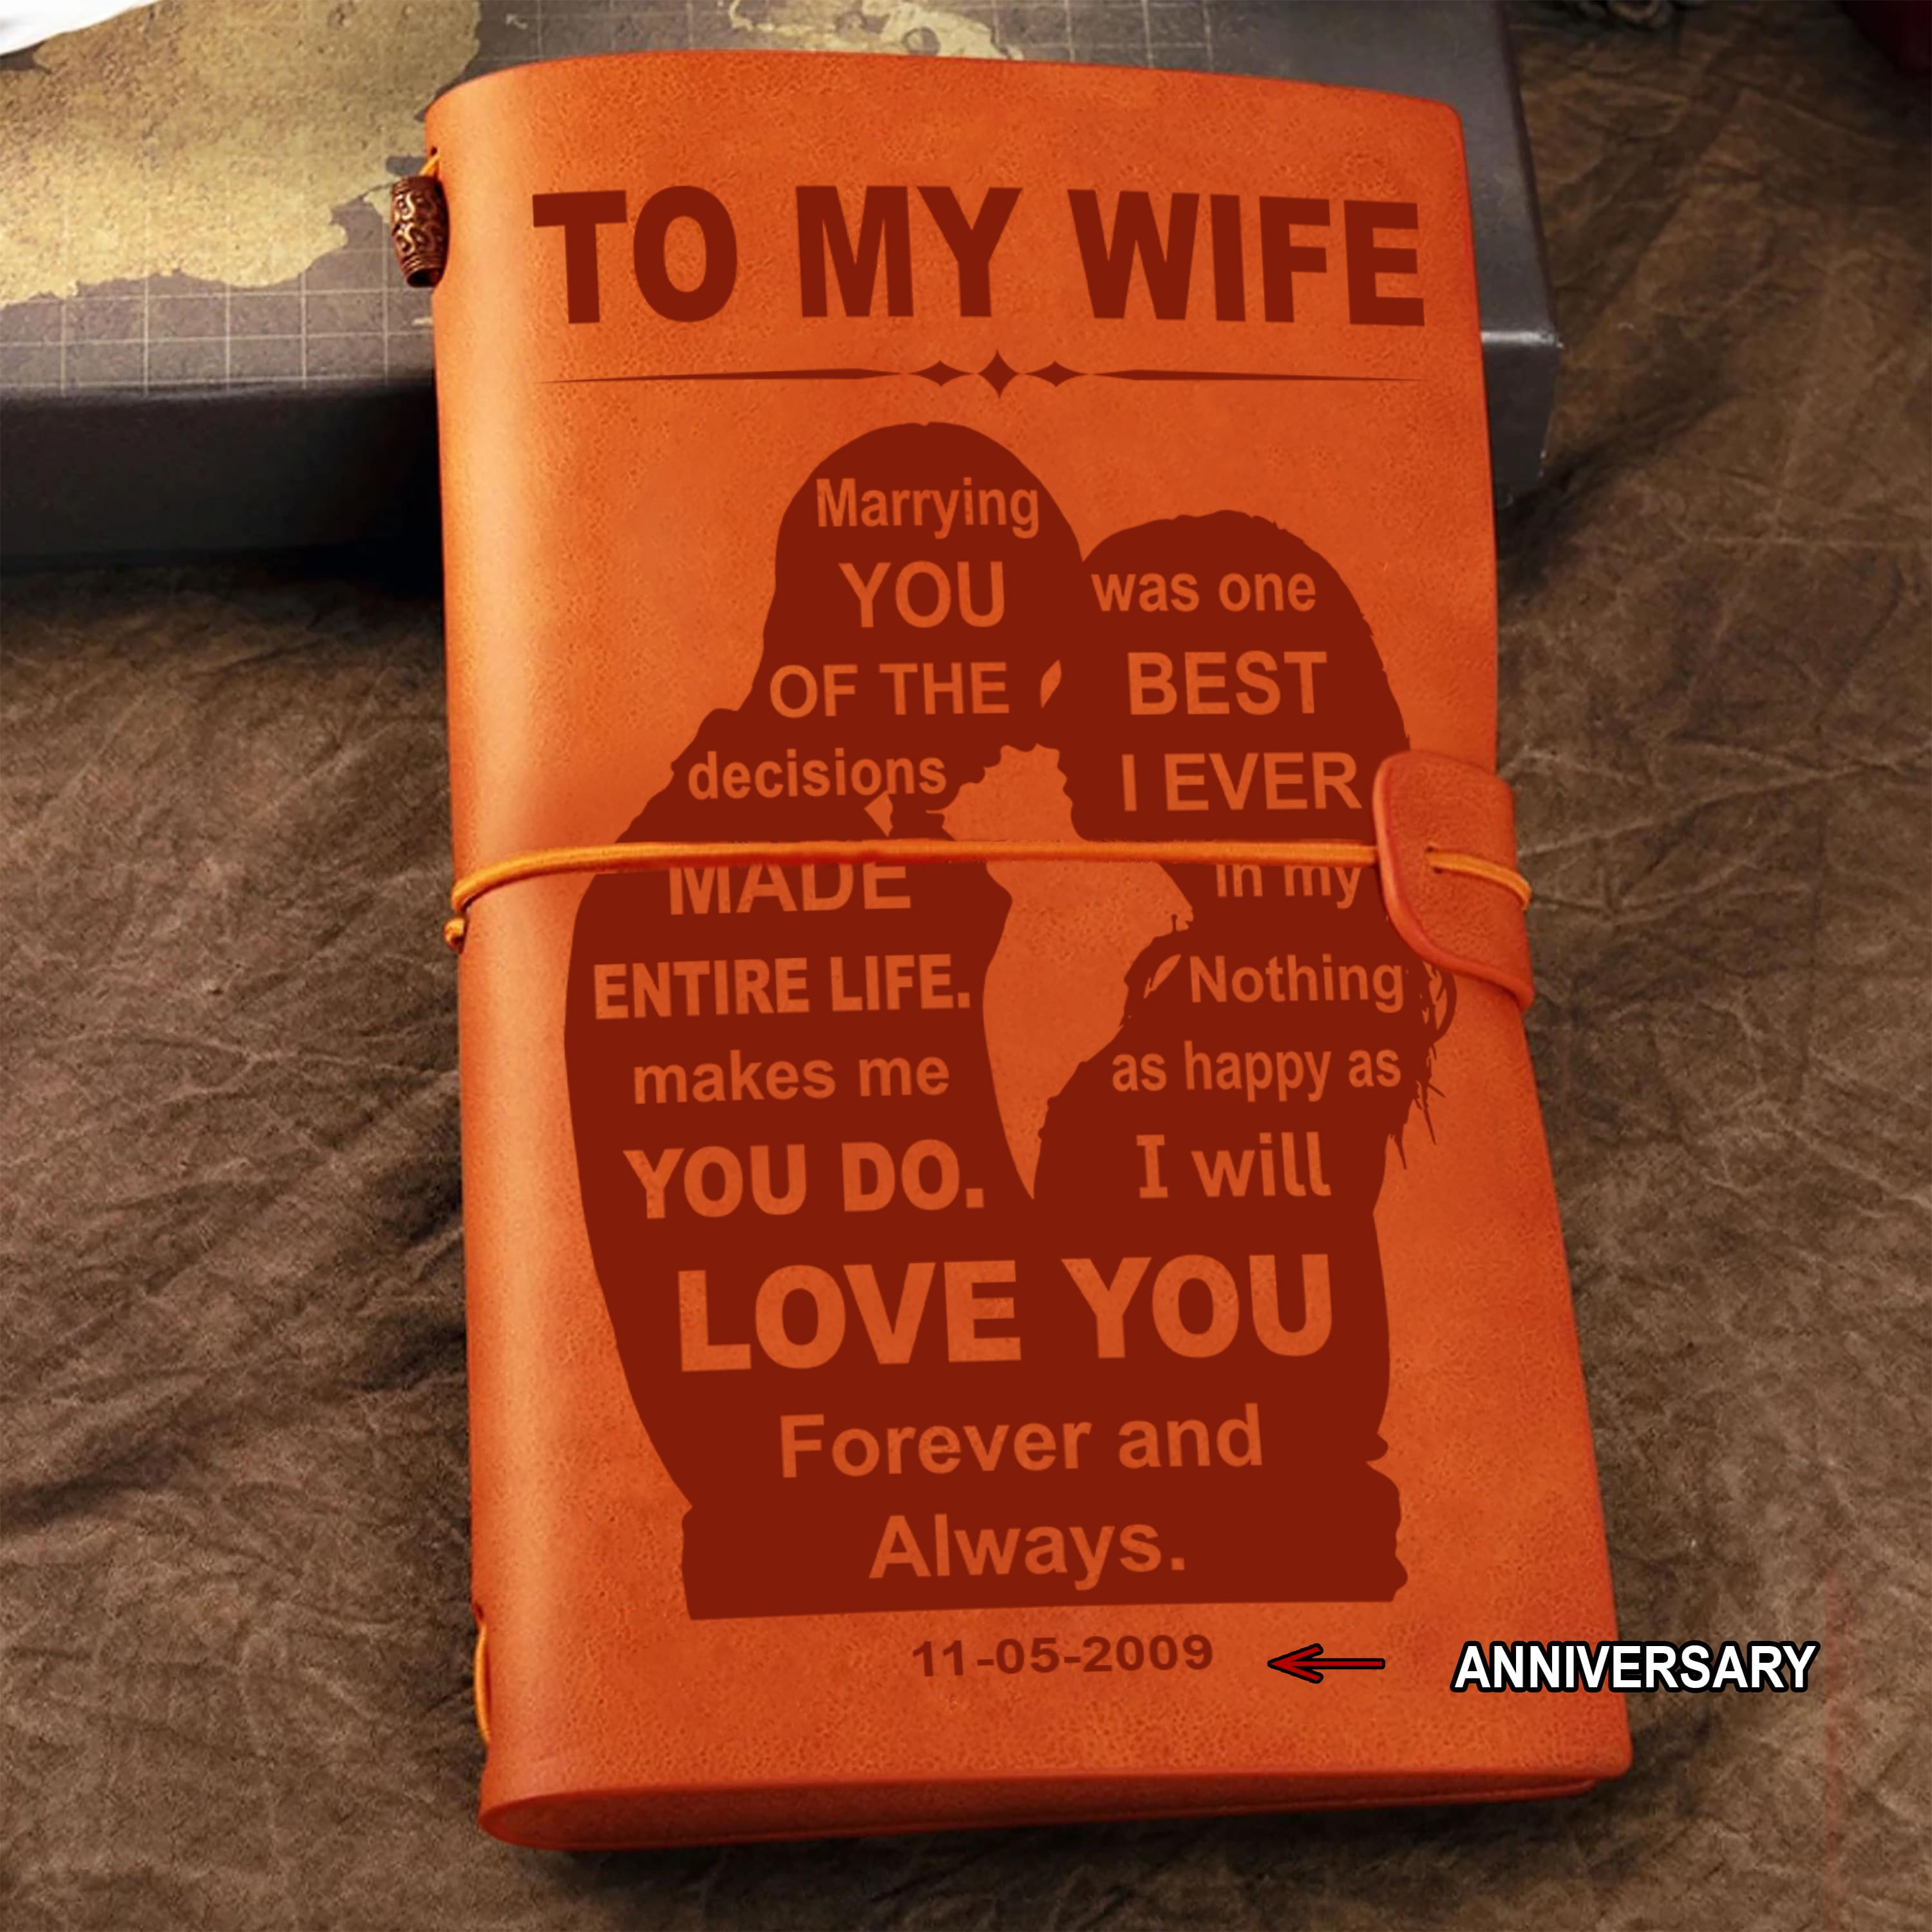 Perfect for anniversaries, birthdays, or just because-Vintage Journal Husband to wife- Marrying you was one of the best decision I ever made